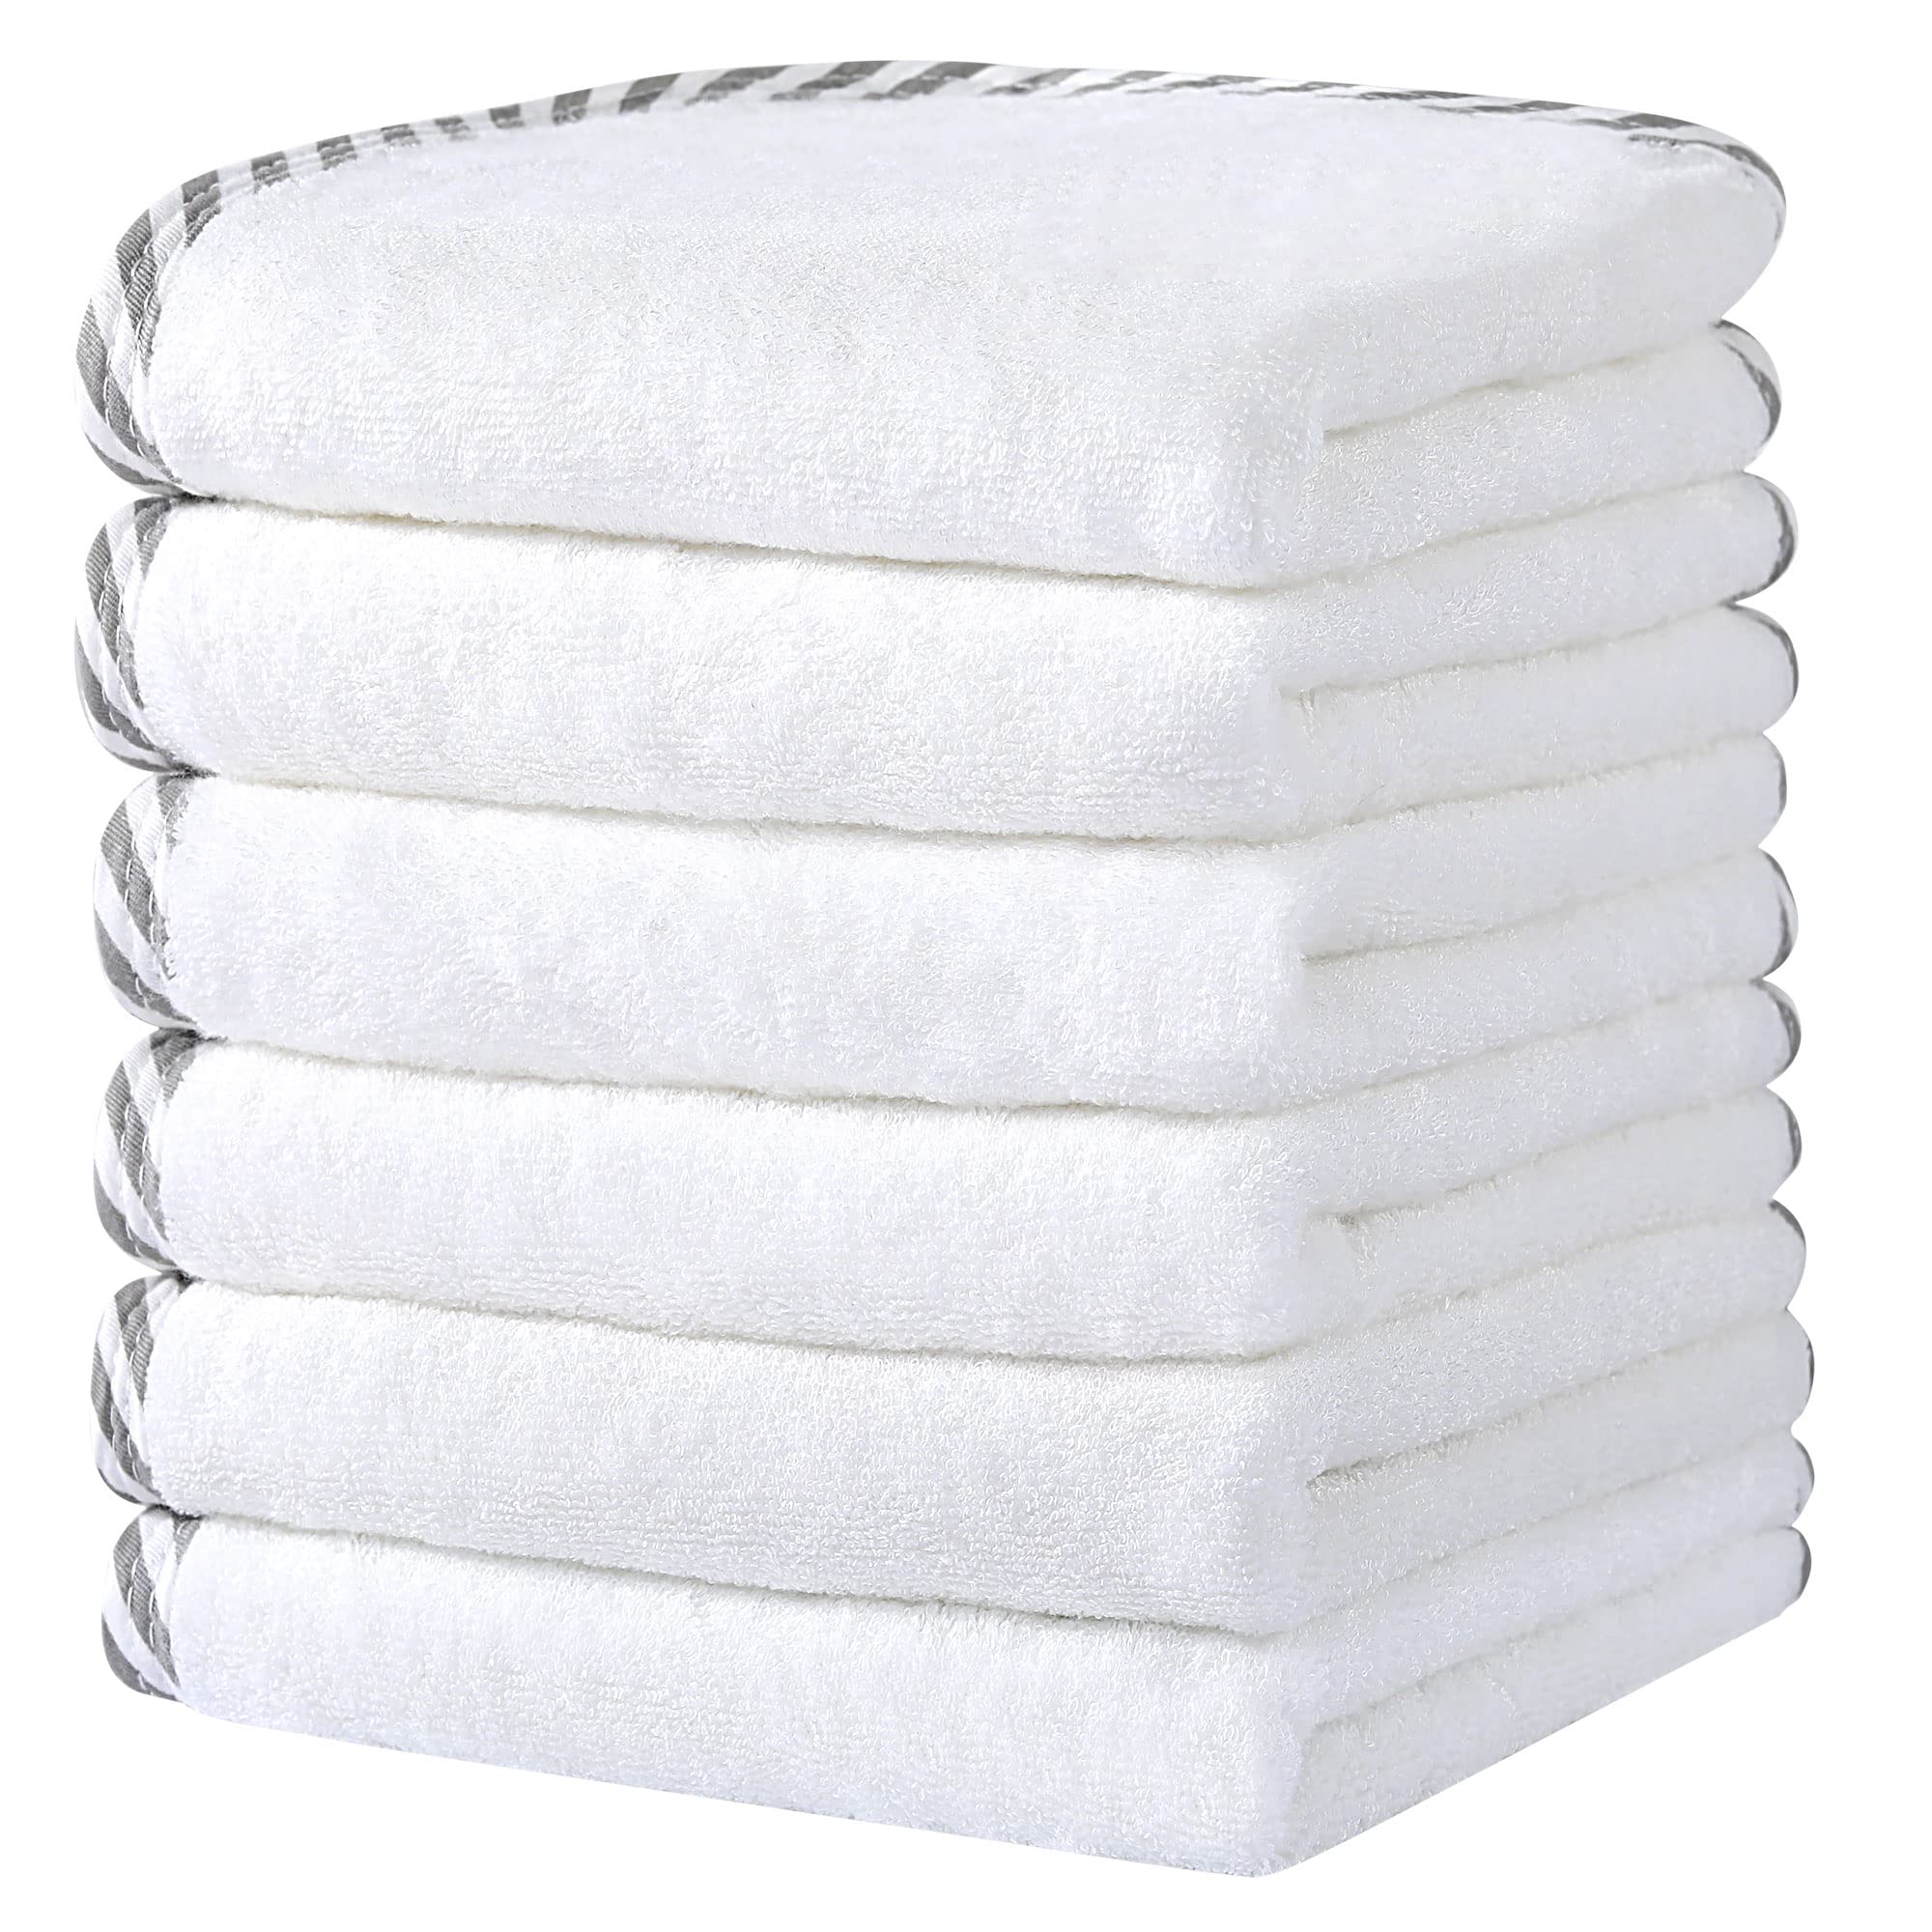 Looxii Bamboo Wash Cloths Baby Face Cloth - 30x30cm Super Soft Absorbent Flannel Towels 6 Pack Luxury Bamboo Washcloths Towel Set for Sensitive Skin